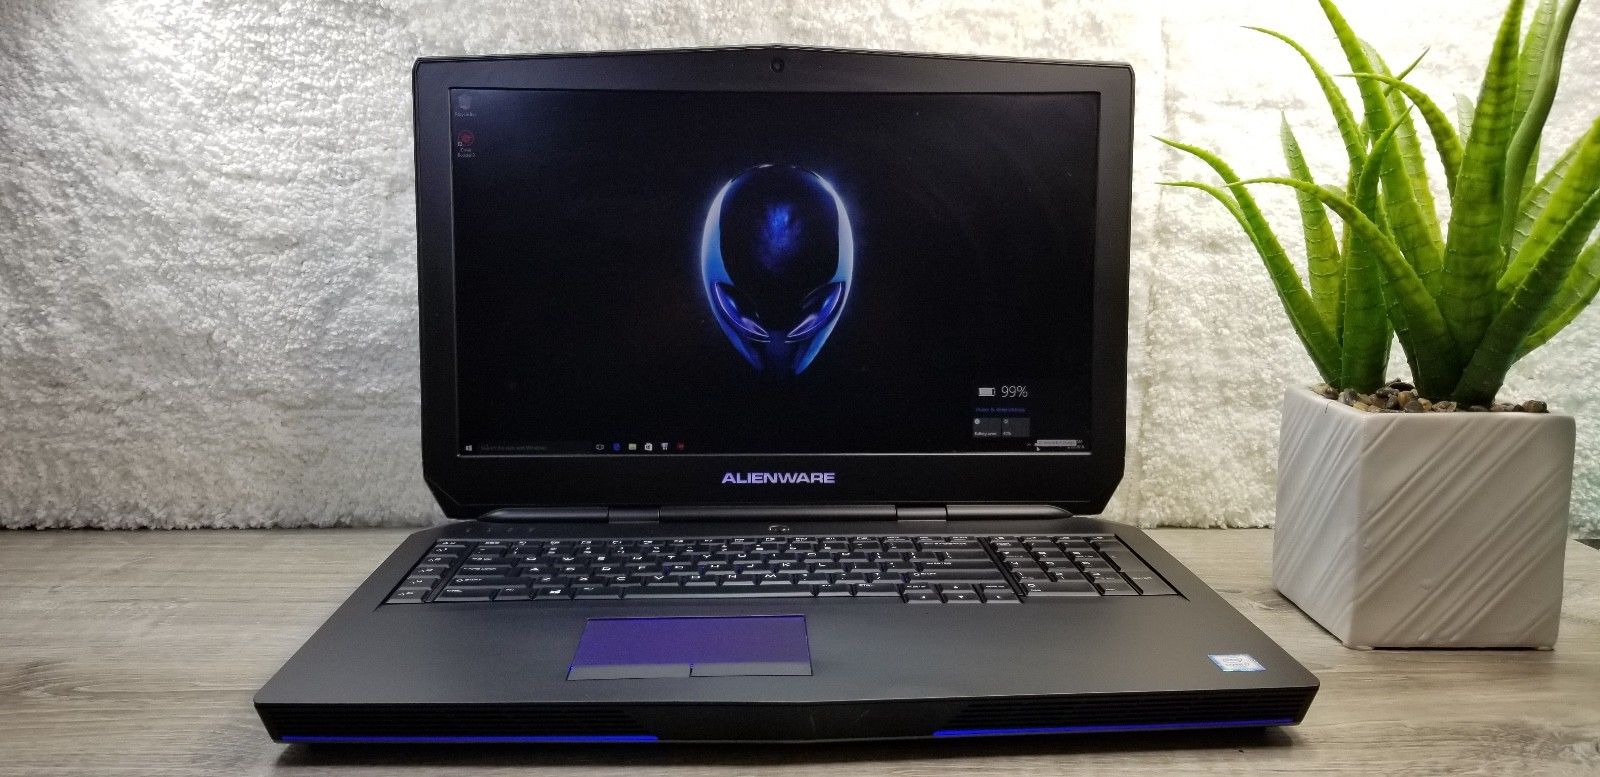 Dell Alienware 17 R3 i7 6700HQ GTX 980M 1TB 8GB . Free and Fully insured Mail!